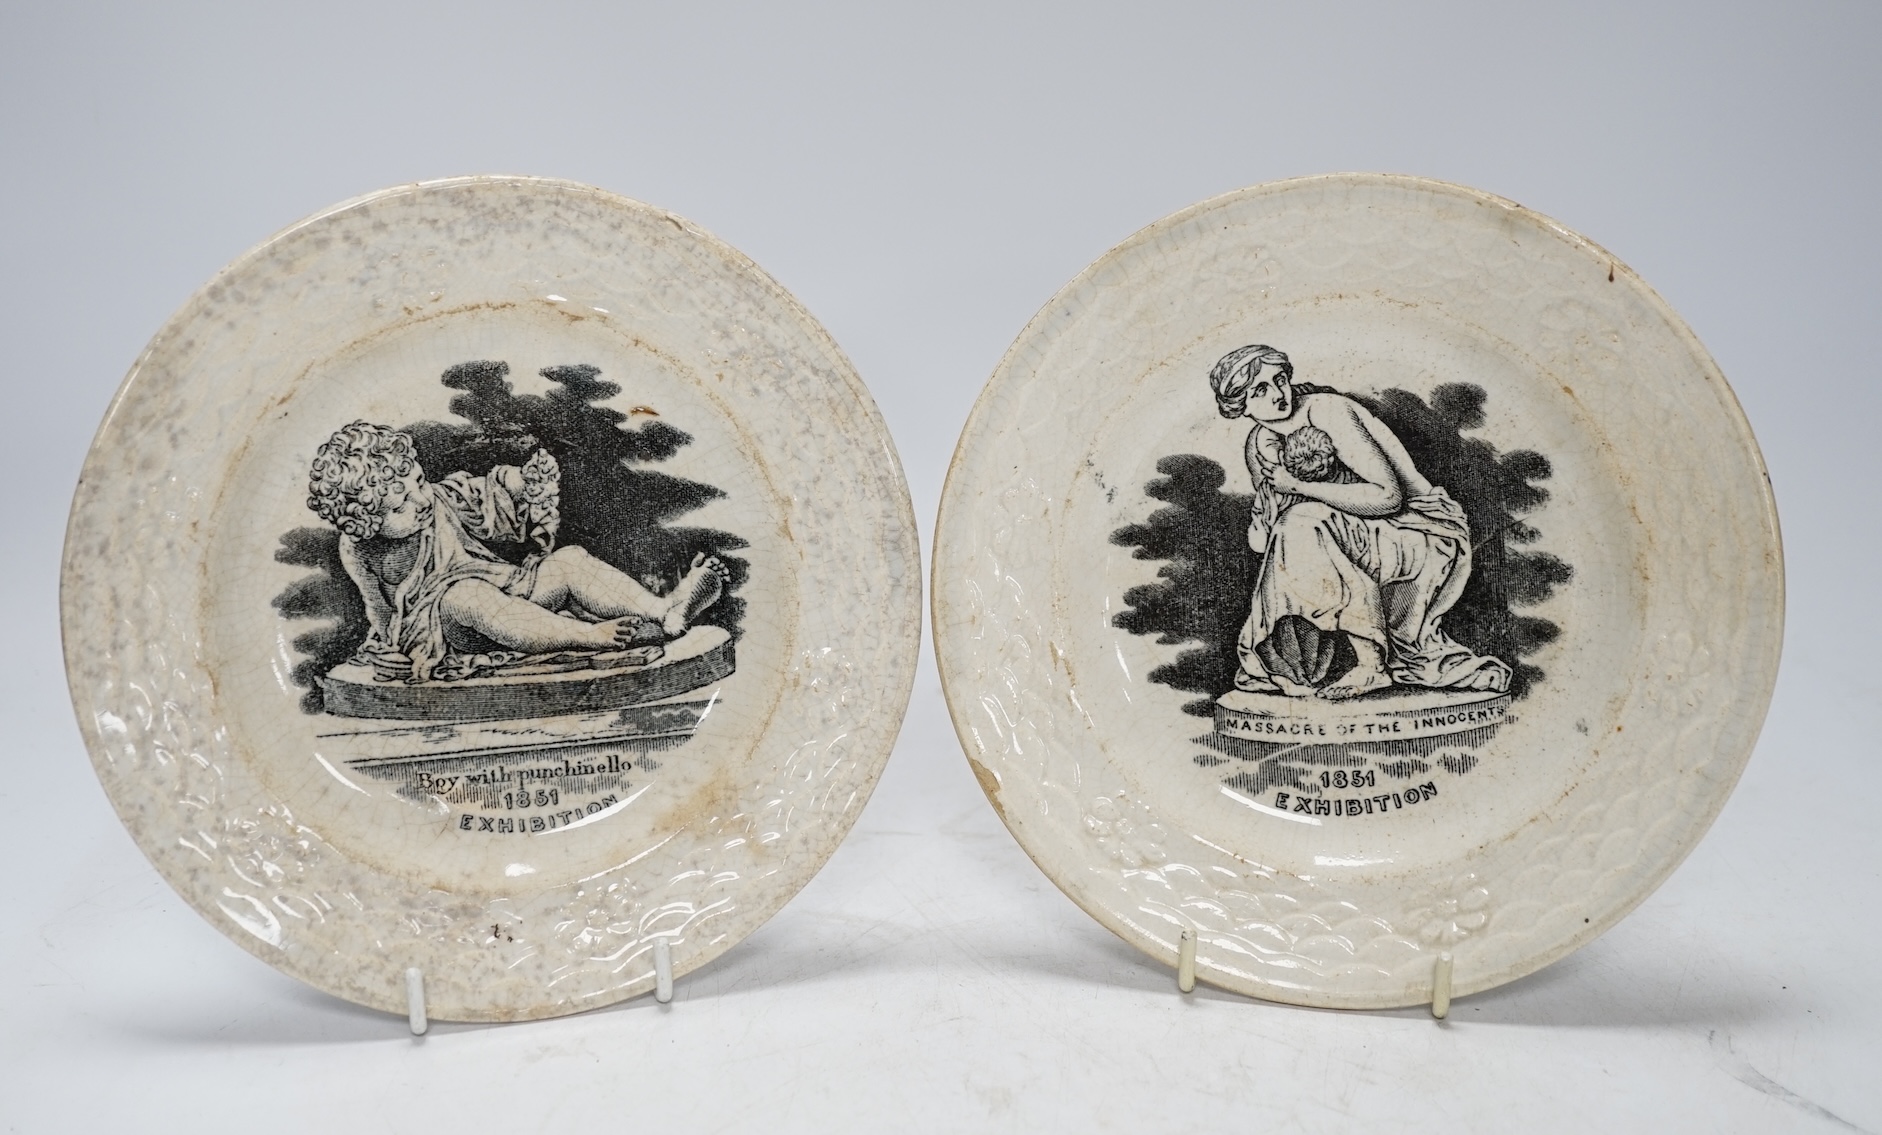 From the Studio of Fred Cuming. A pair of printed 1851 exhibition plates ‘Boy with Punchinello’ and ‘Massacre of the Innocent’, 17cm in diameter. Condition - poor to fair